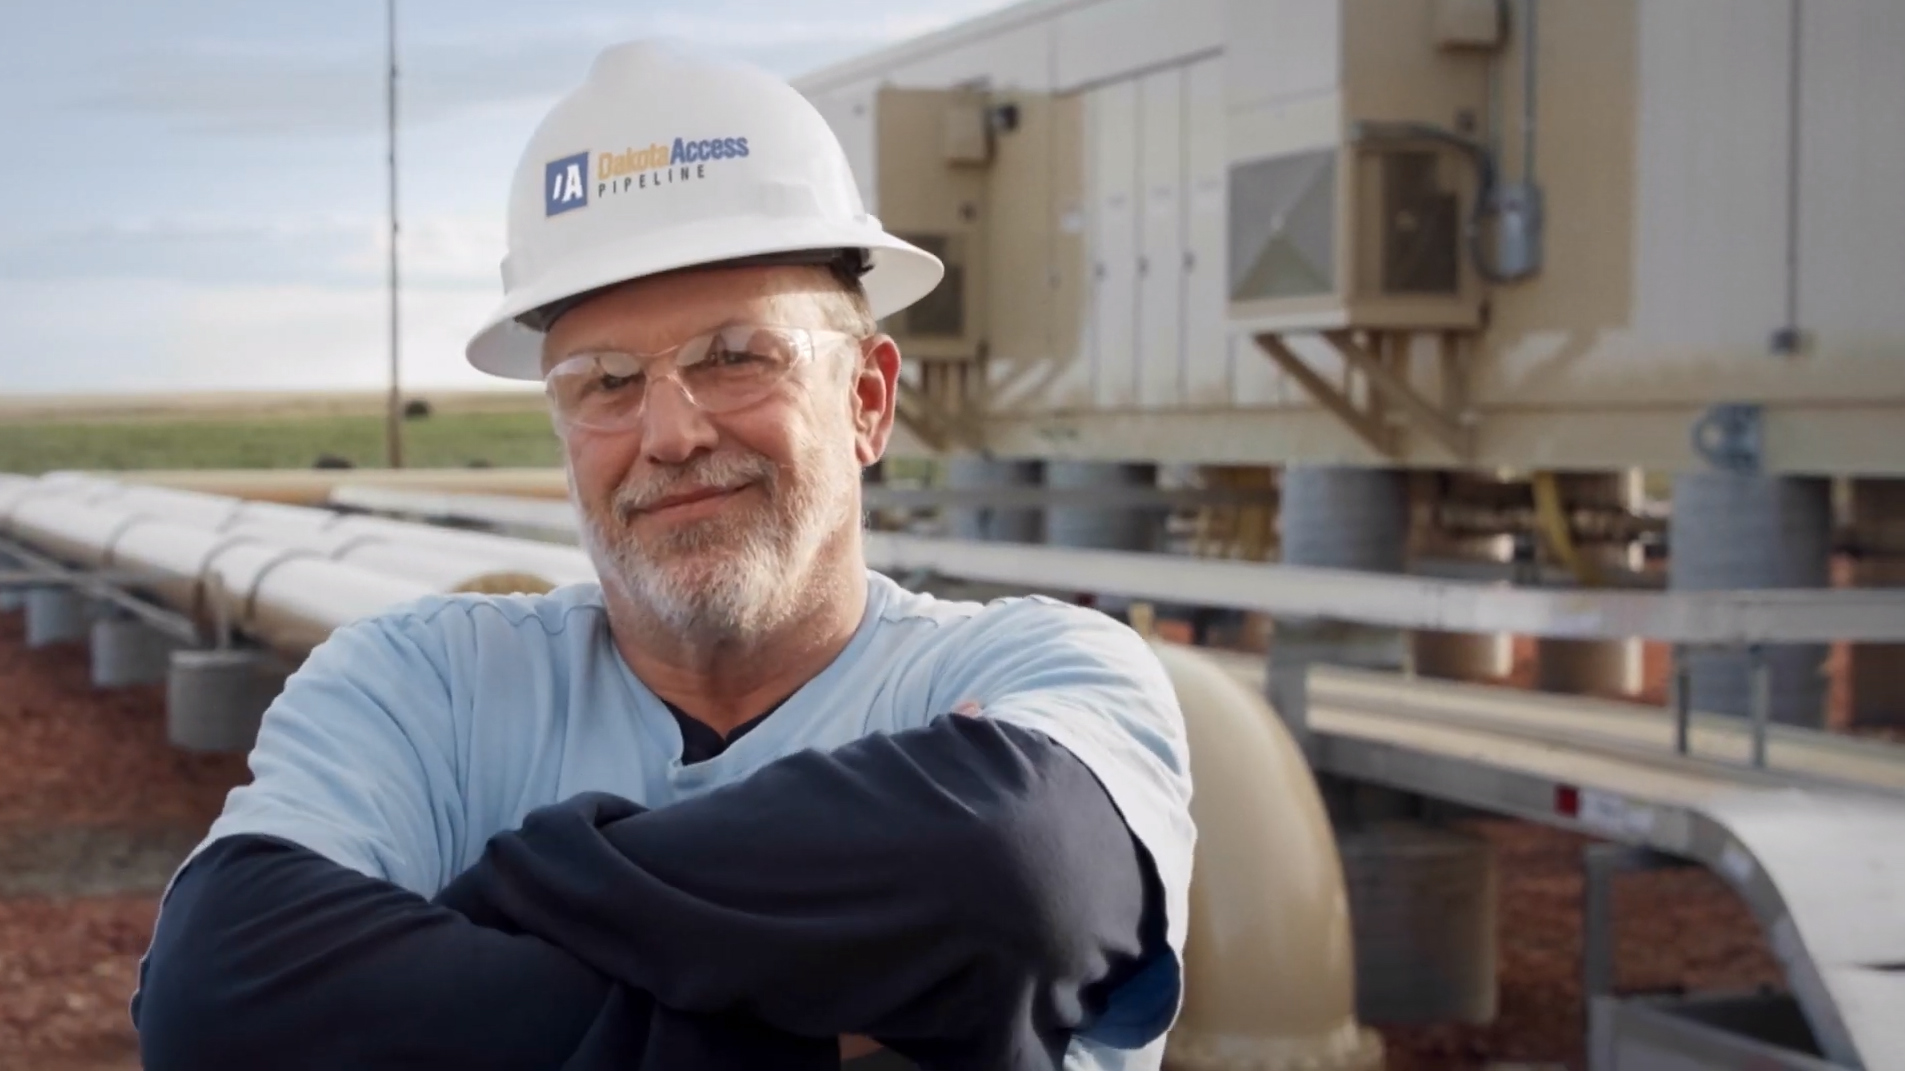 Illinois workers, and jobs, were front and center in a Dakota Access pipeline ad that aired during Super Bowl LIV on Sunday, Feb. 2, 2020. (Energy Transfer / YouTube)